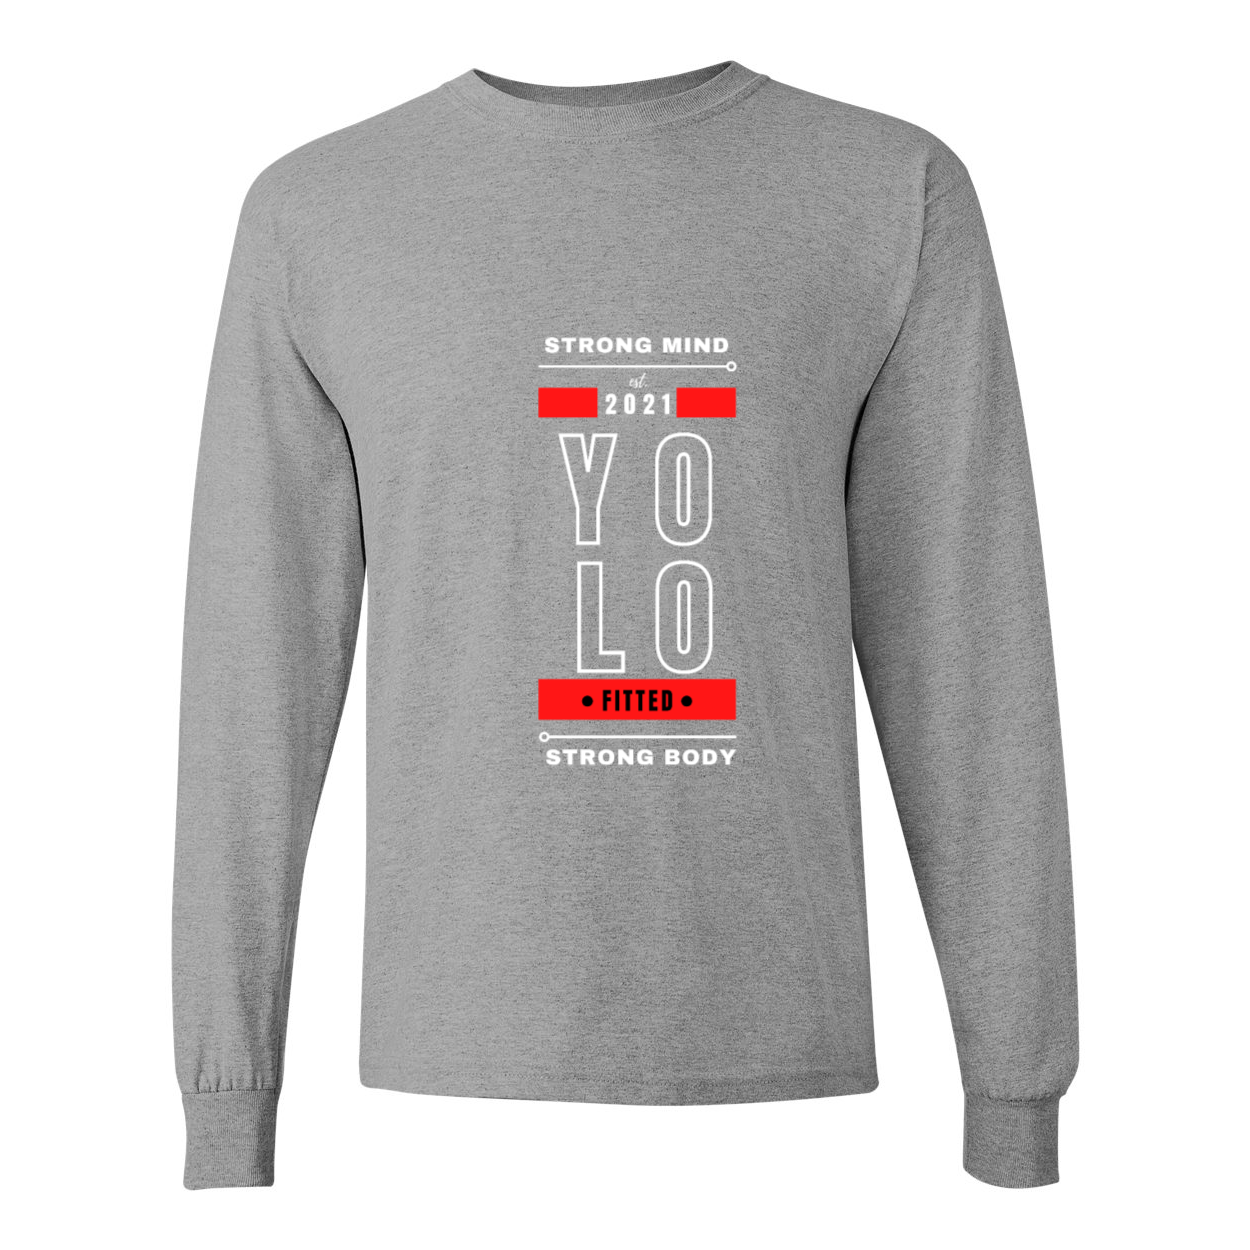 YOLO FITTED "EST. 2021" UNISEX LS